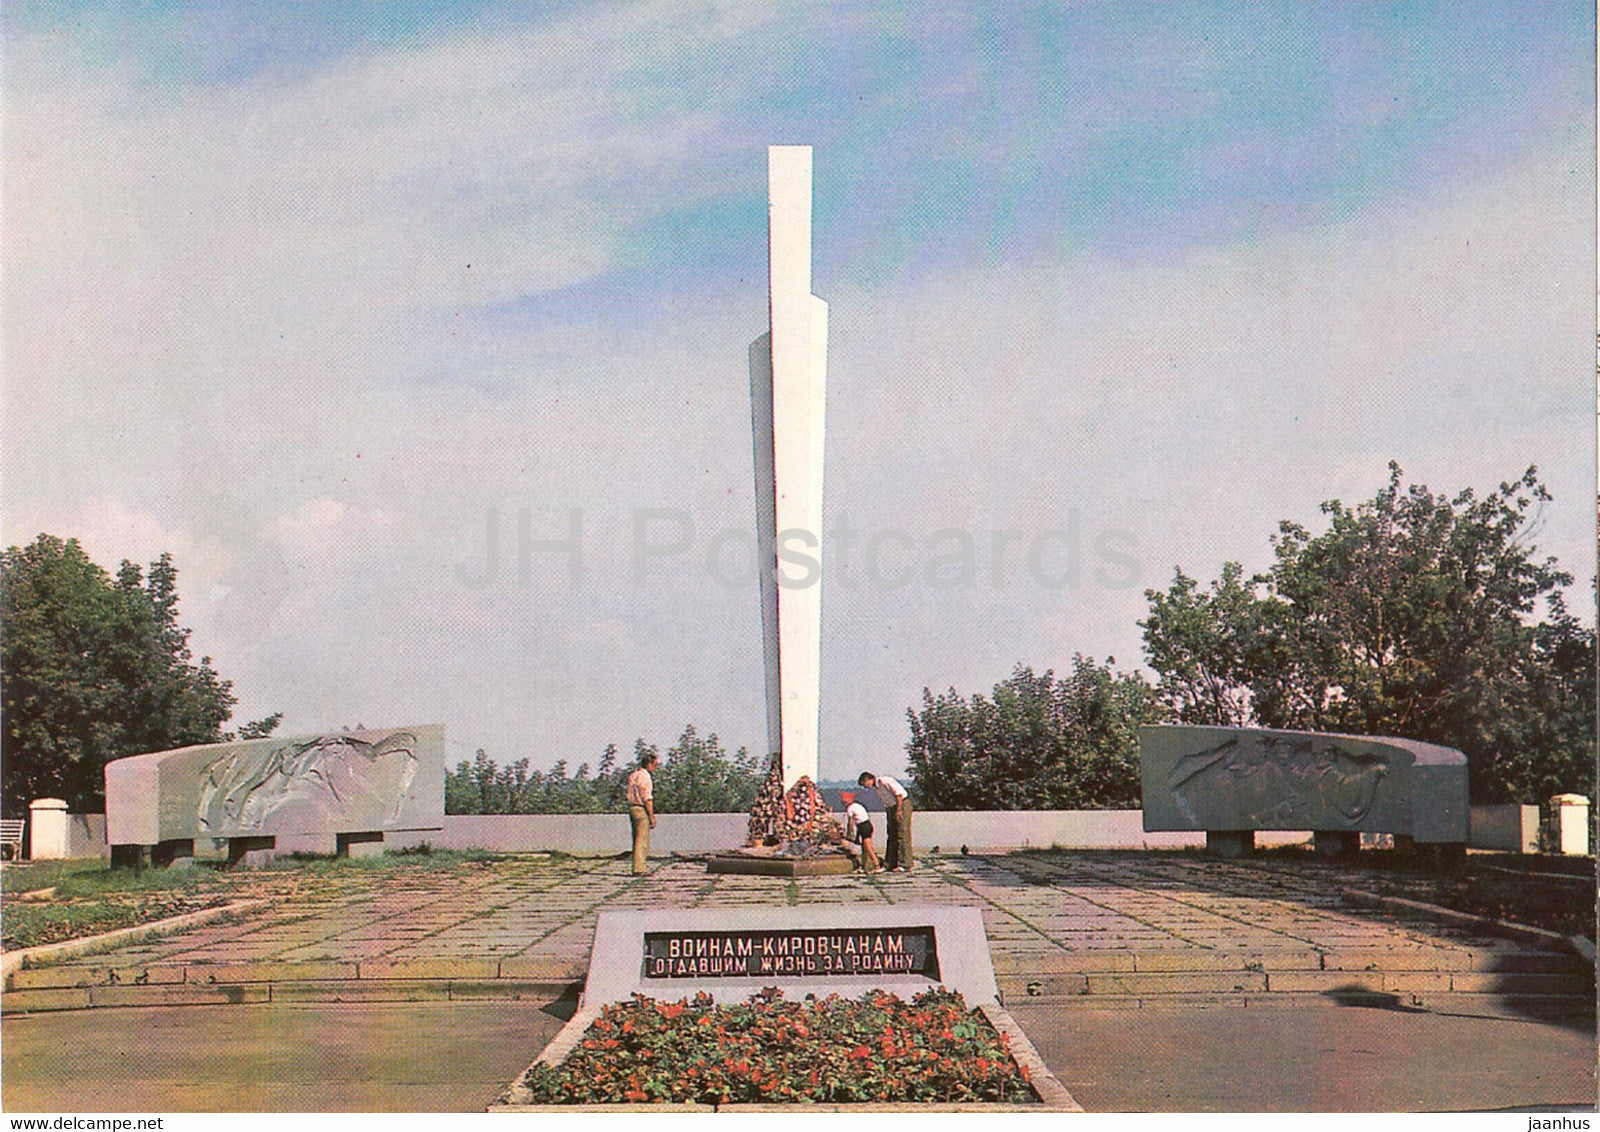 Kirov - Vyatka - Monument to the Kirov residents who died in the WWII - 1983 - Russia USSR - unused - JH Postcards